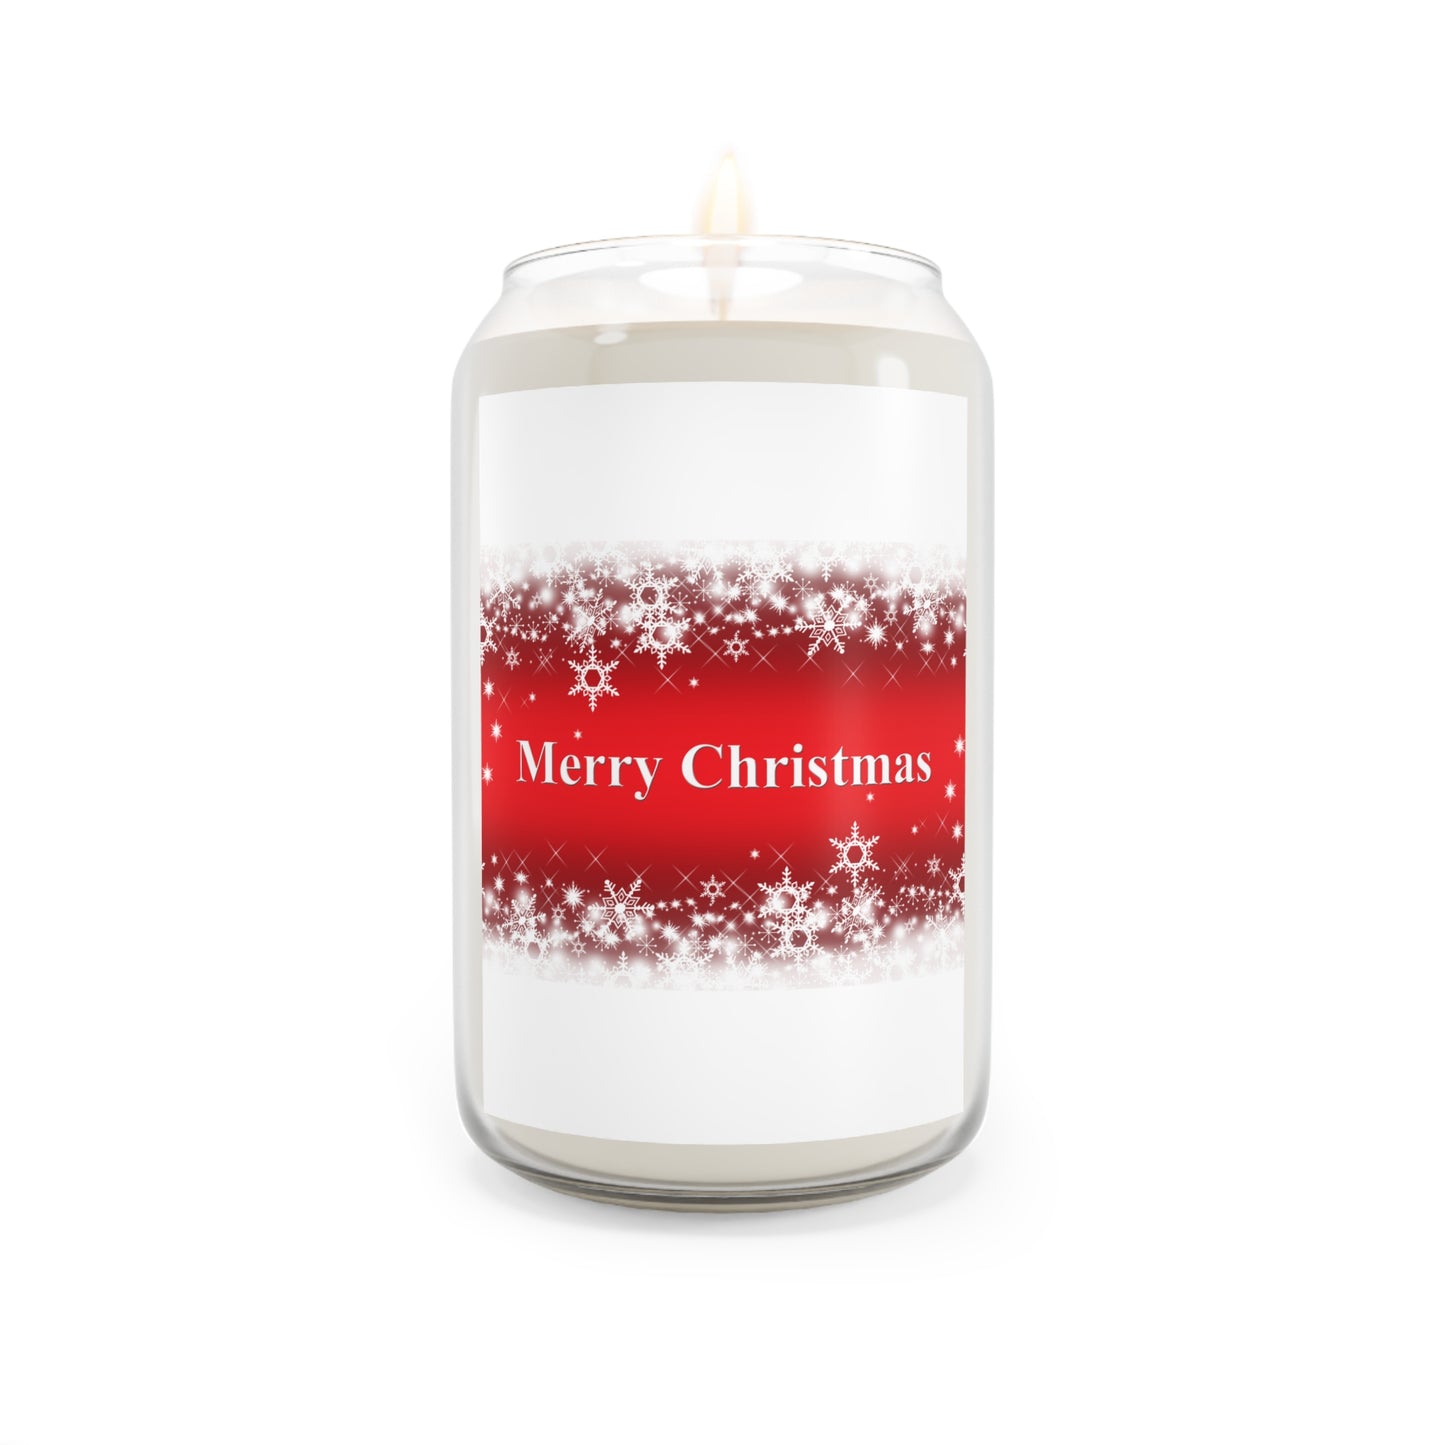 Merry Christmas Scented Candle, 13.75oz, Comes in 3 Scents